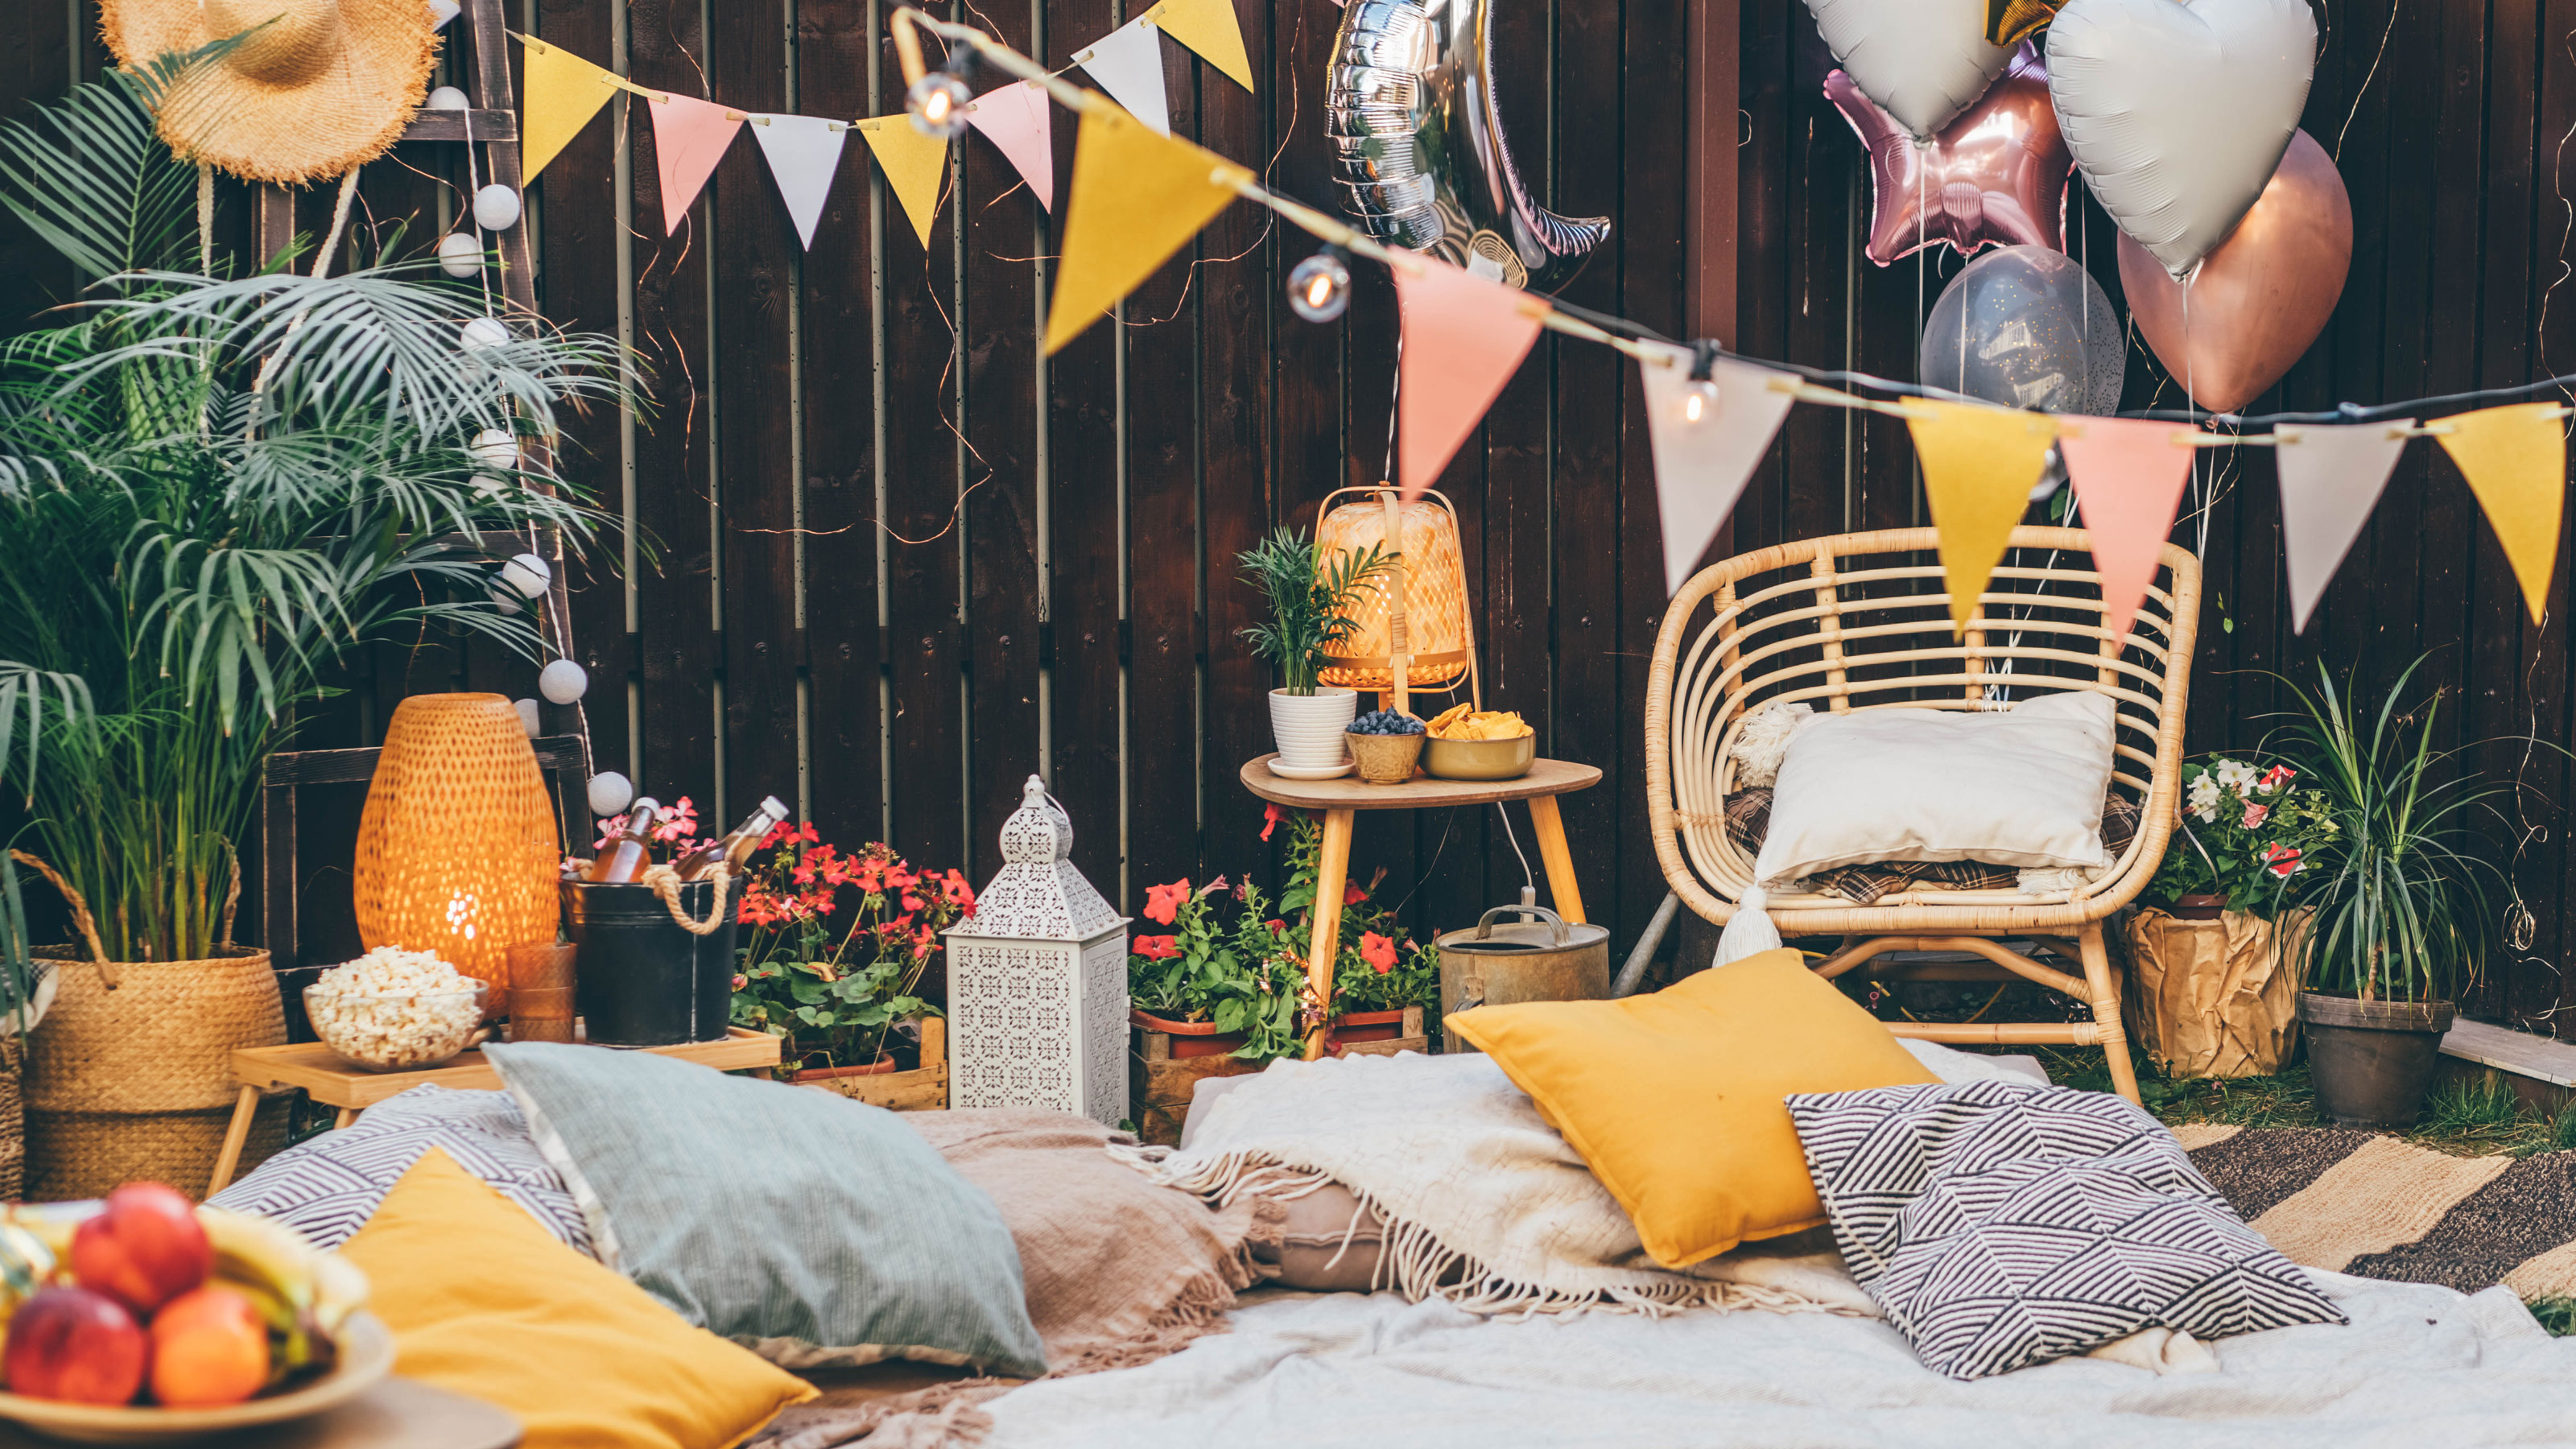 5 Tips for a Backyard Fiesta Party - Design Improvised